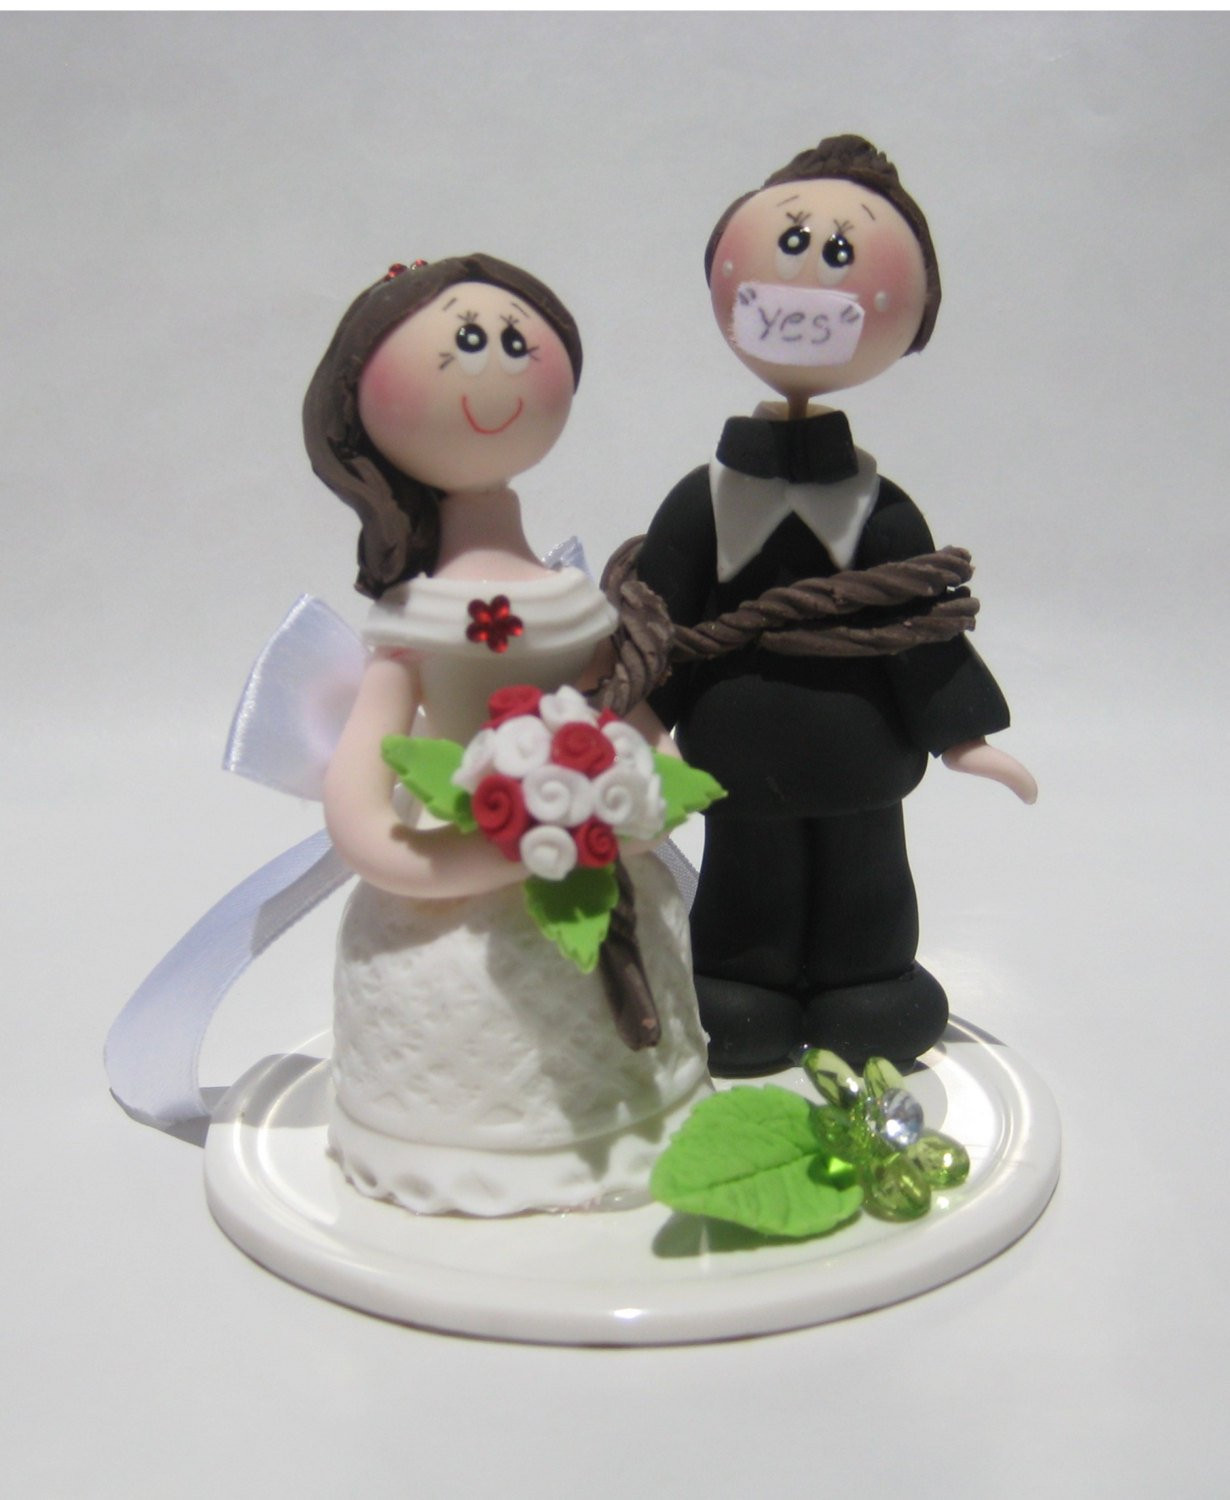 Funny Cake toppers for Wedding Cakes 20 Best Ideas Wedding Cake topper Funny Wedding Cake topper Cake topper